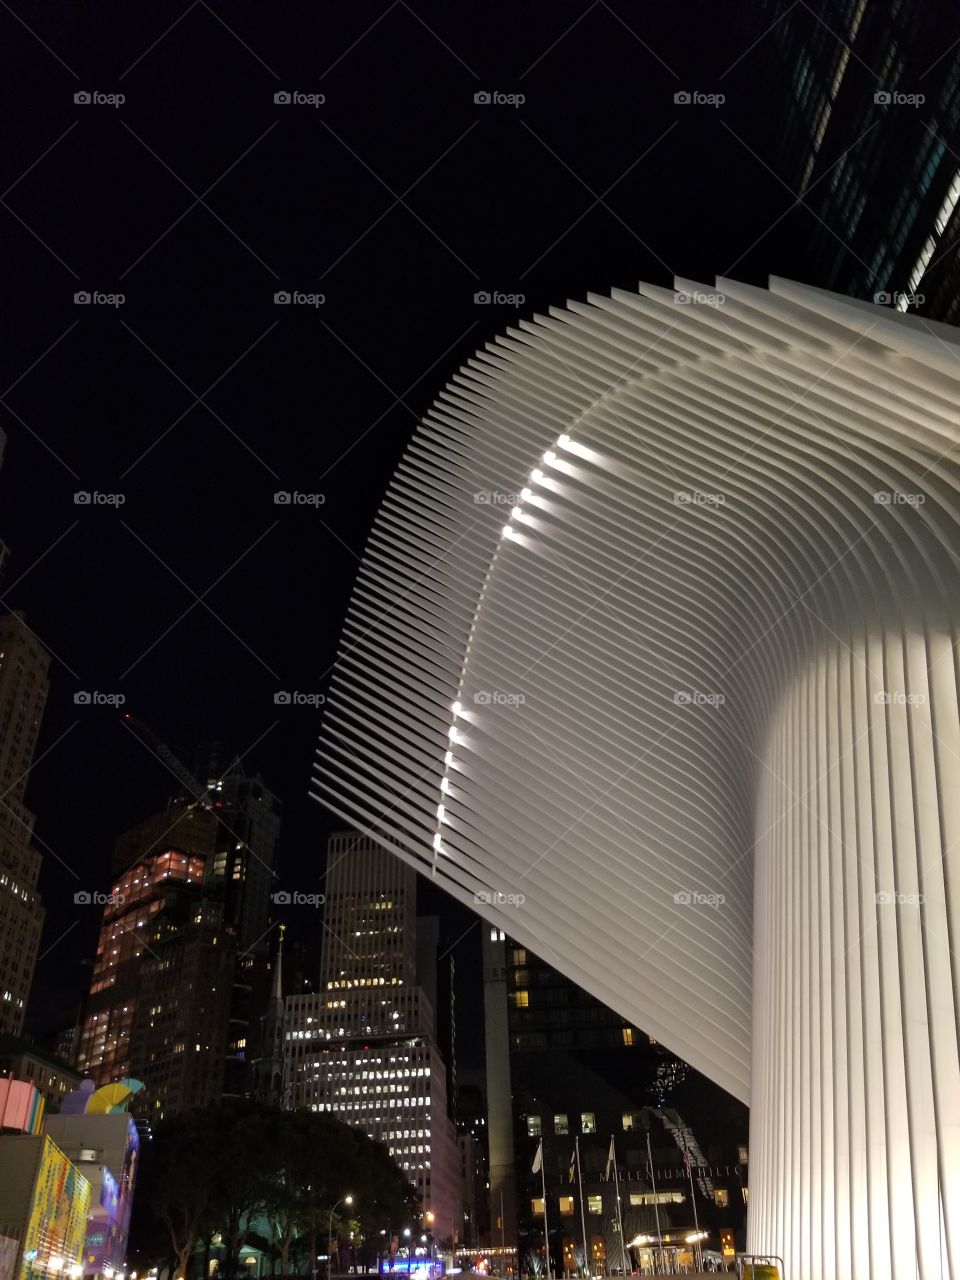 Oculus in NYC